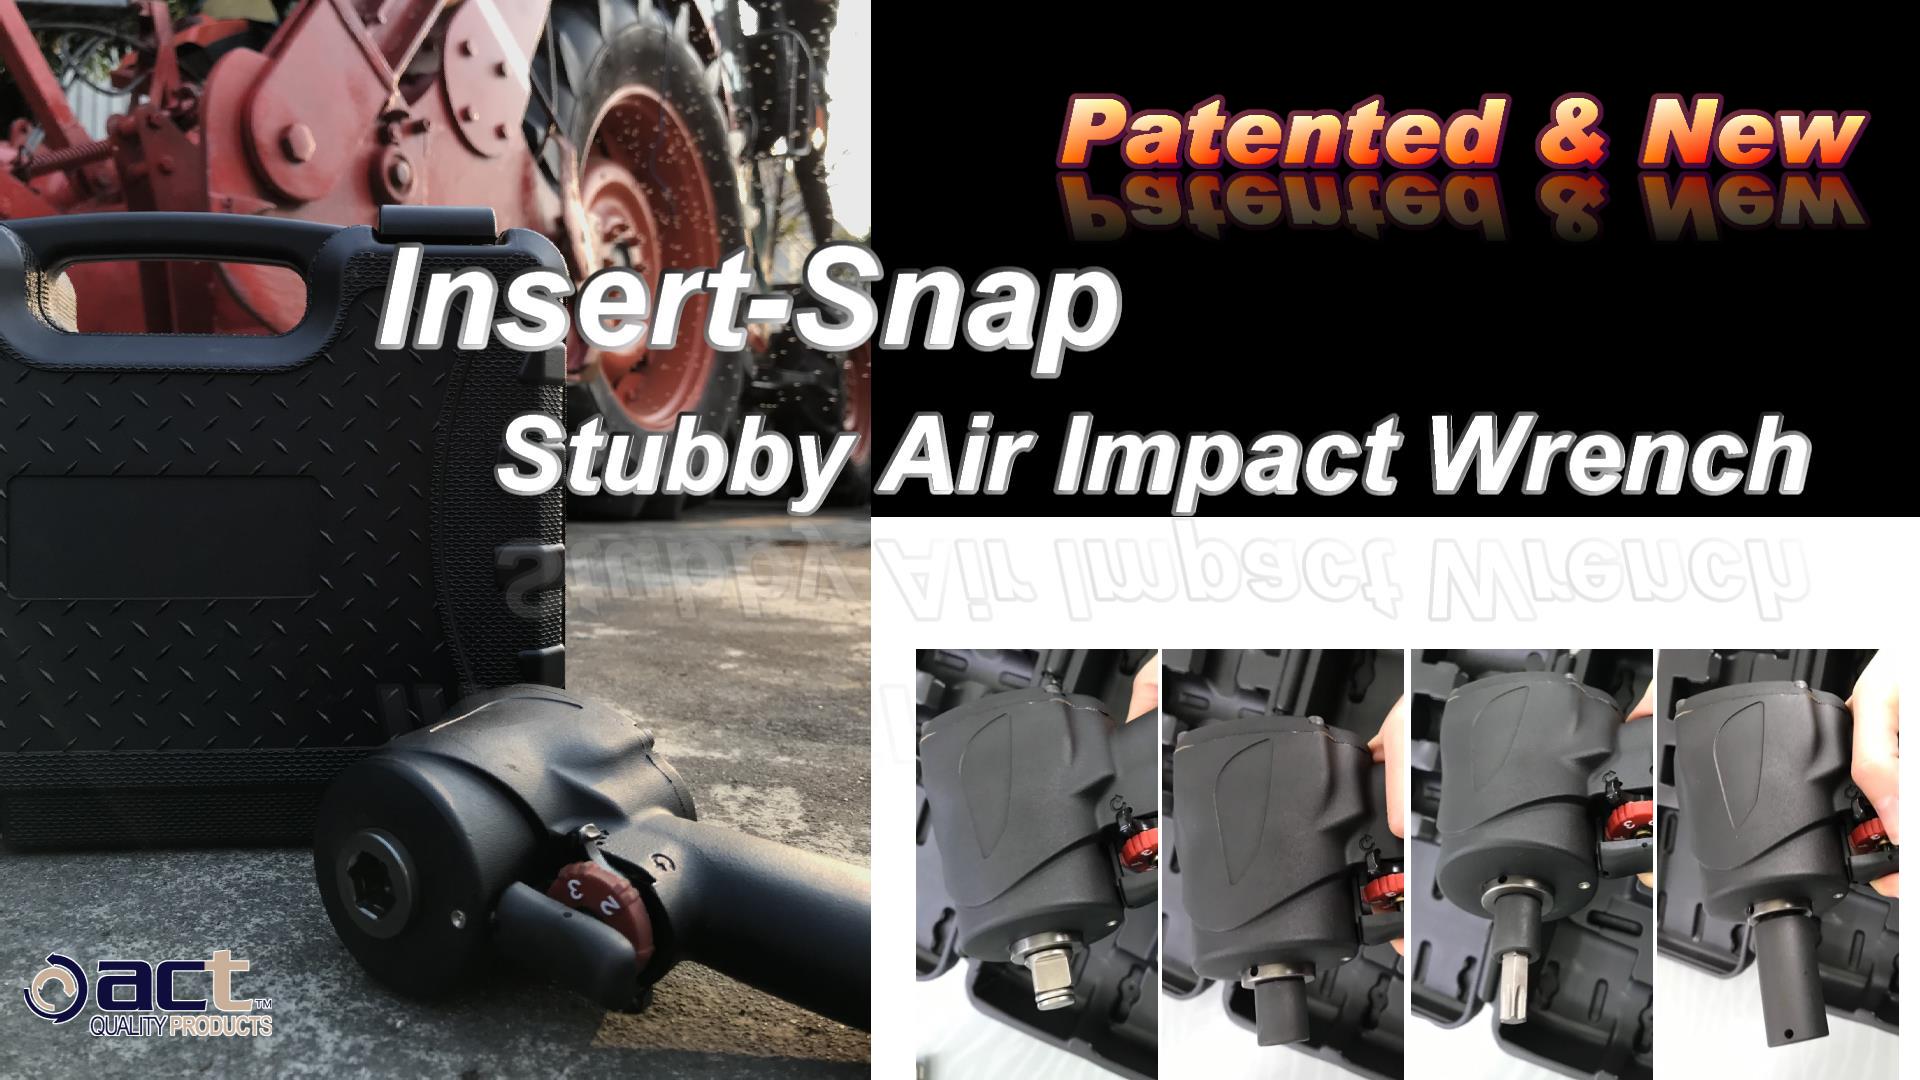 Insert-Snap Stubby Air Impact Wrench